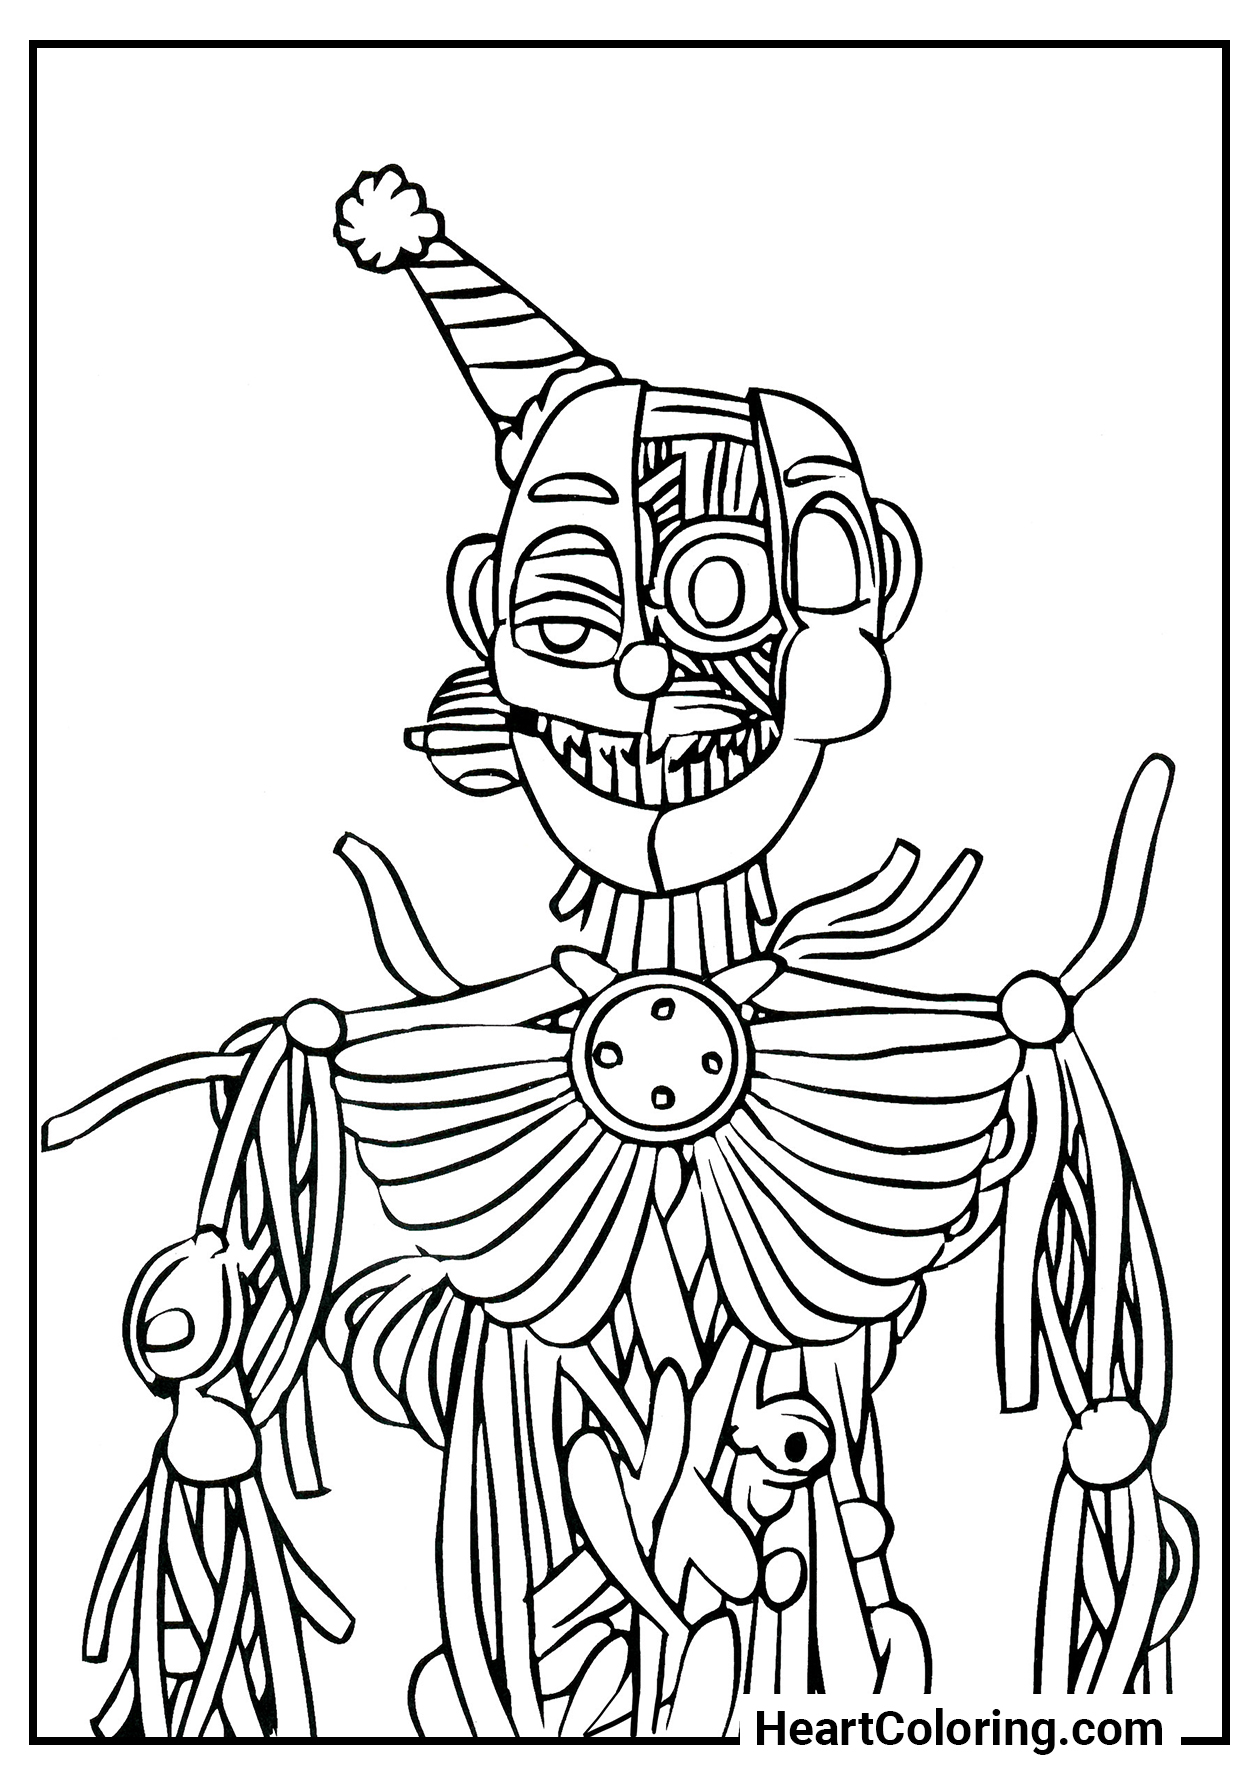 Five Nights at Freddy's Coloring Pages ...